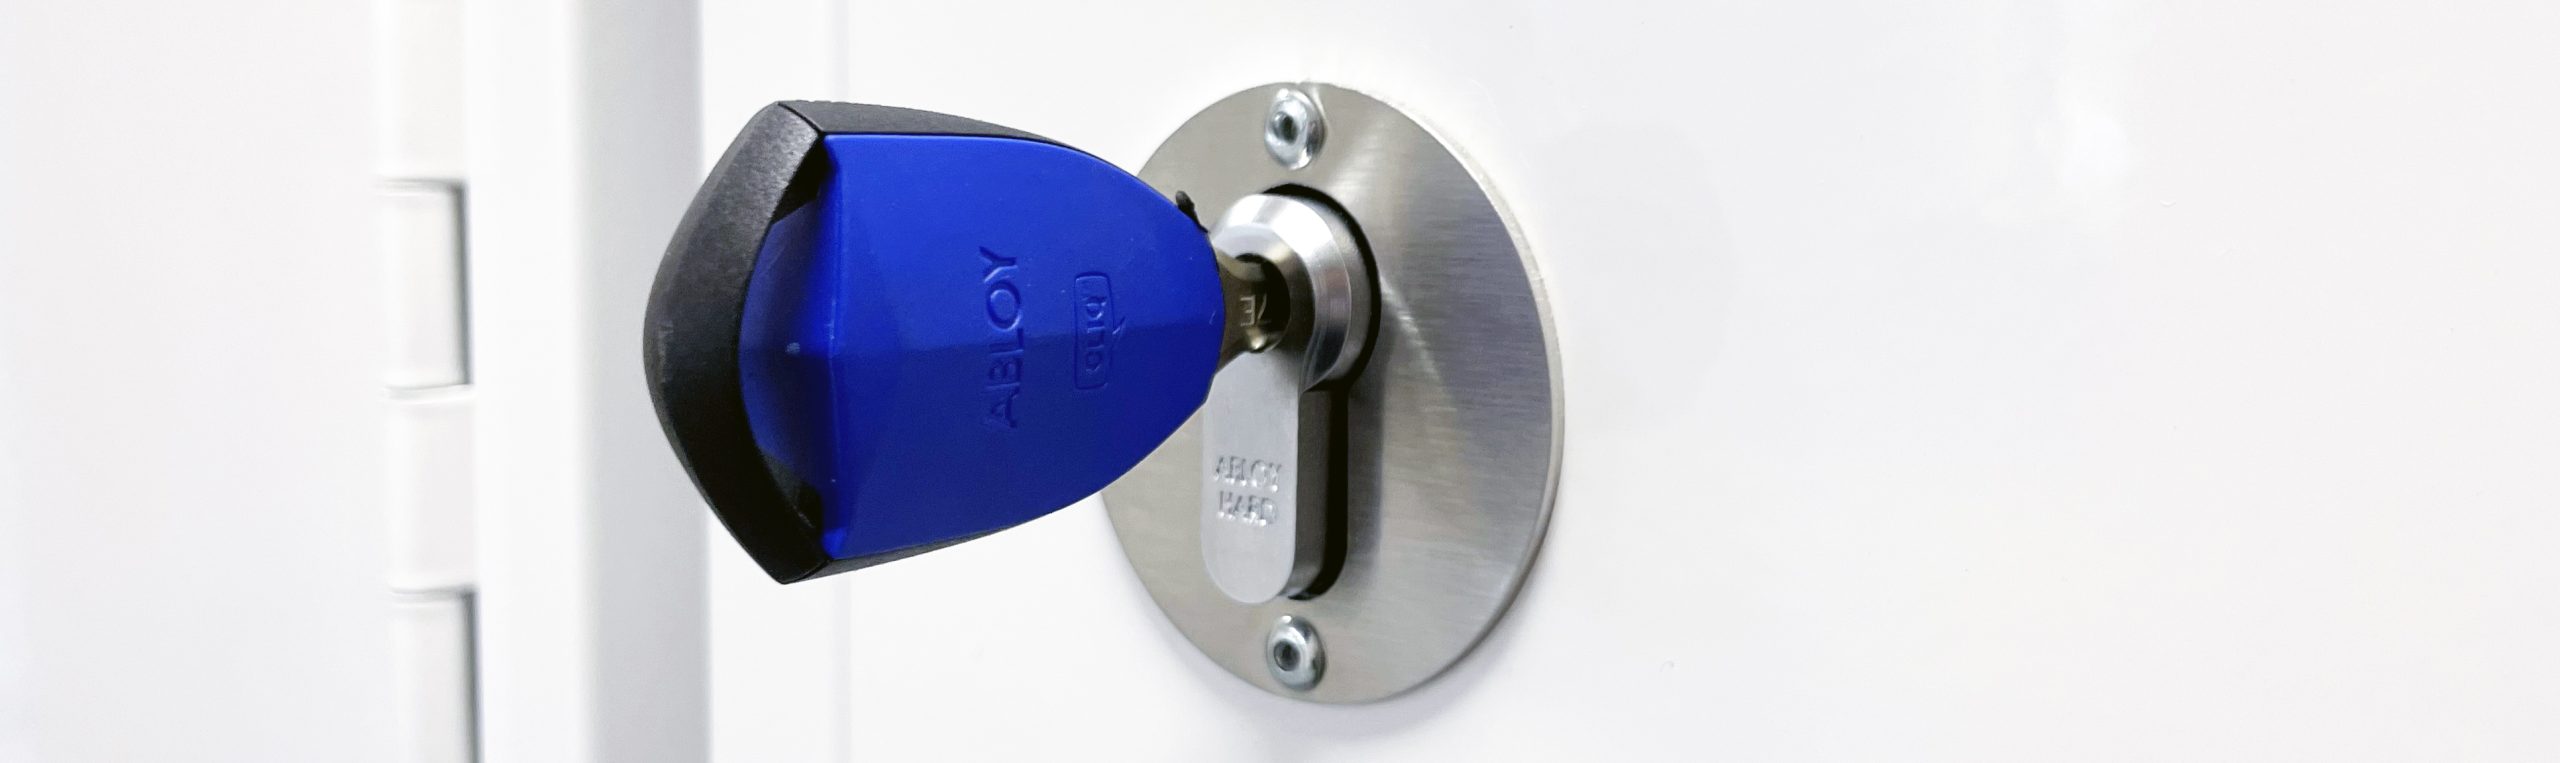 Abloy Cliq Lock Cylinder with Bluetooth key fitted to a Pharmacy Medical Cabinet